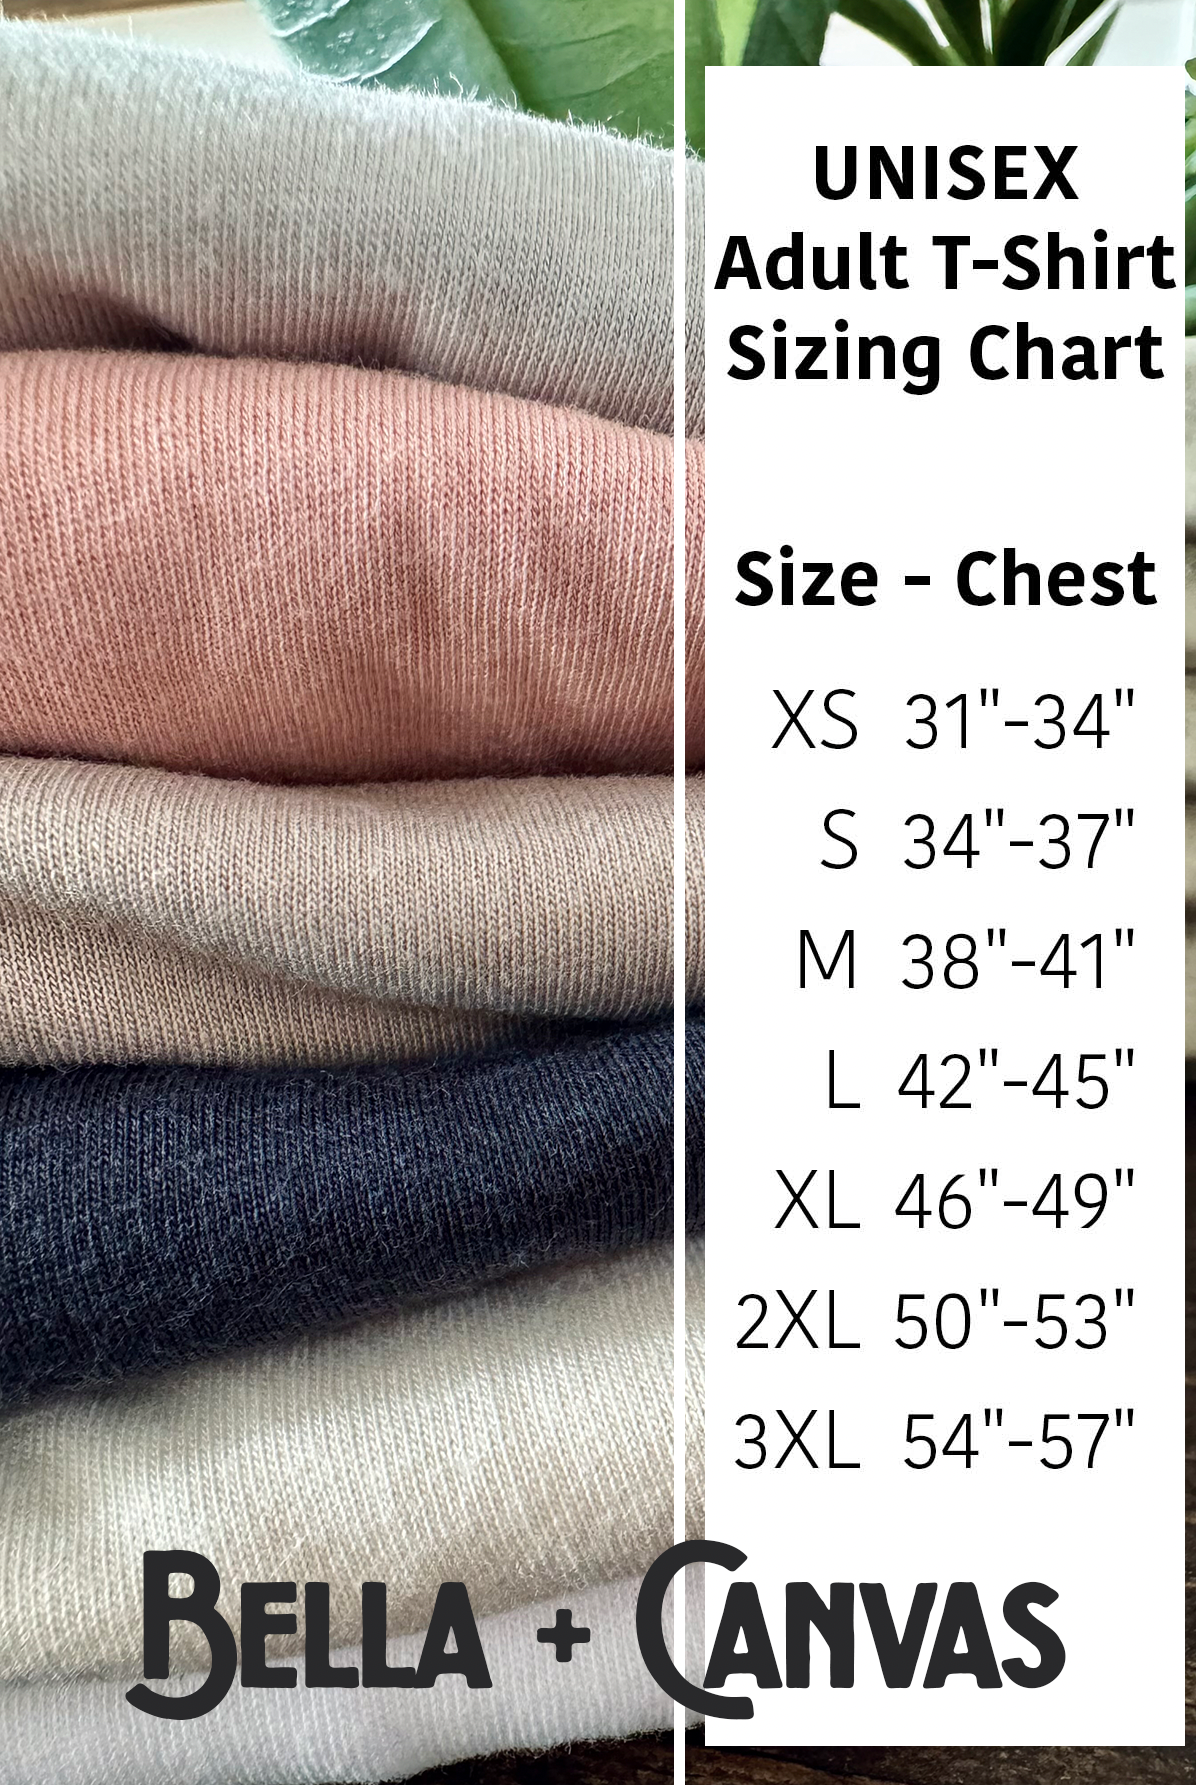 Bella and Canvas unisex adult shirt sizing chart for Boots and Roots Apparel.